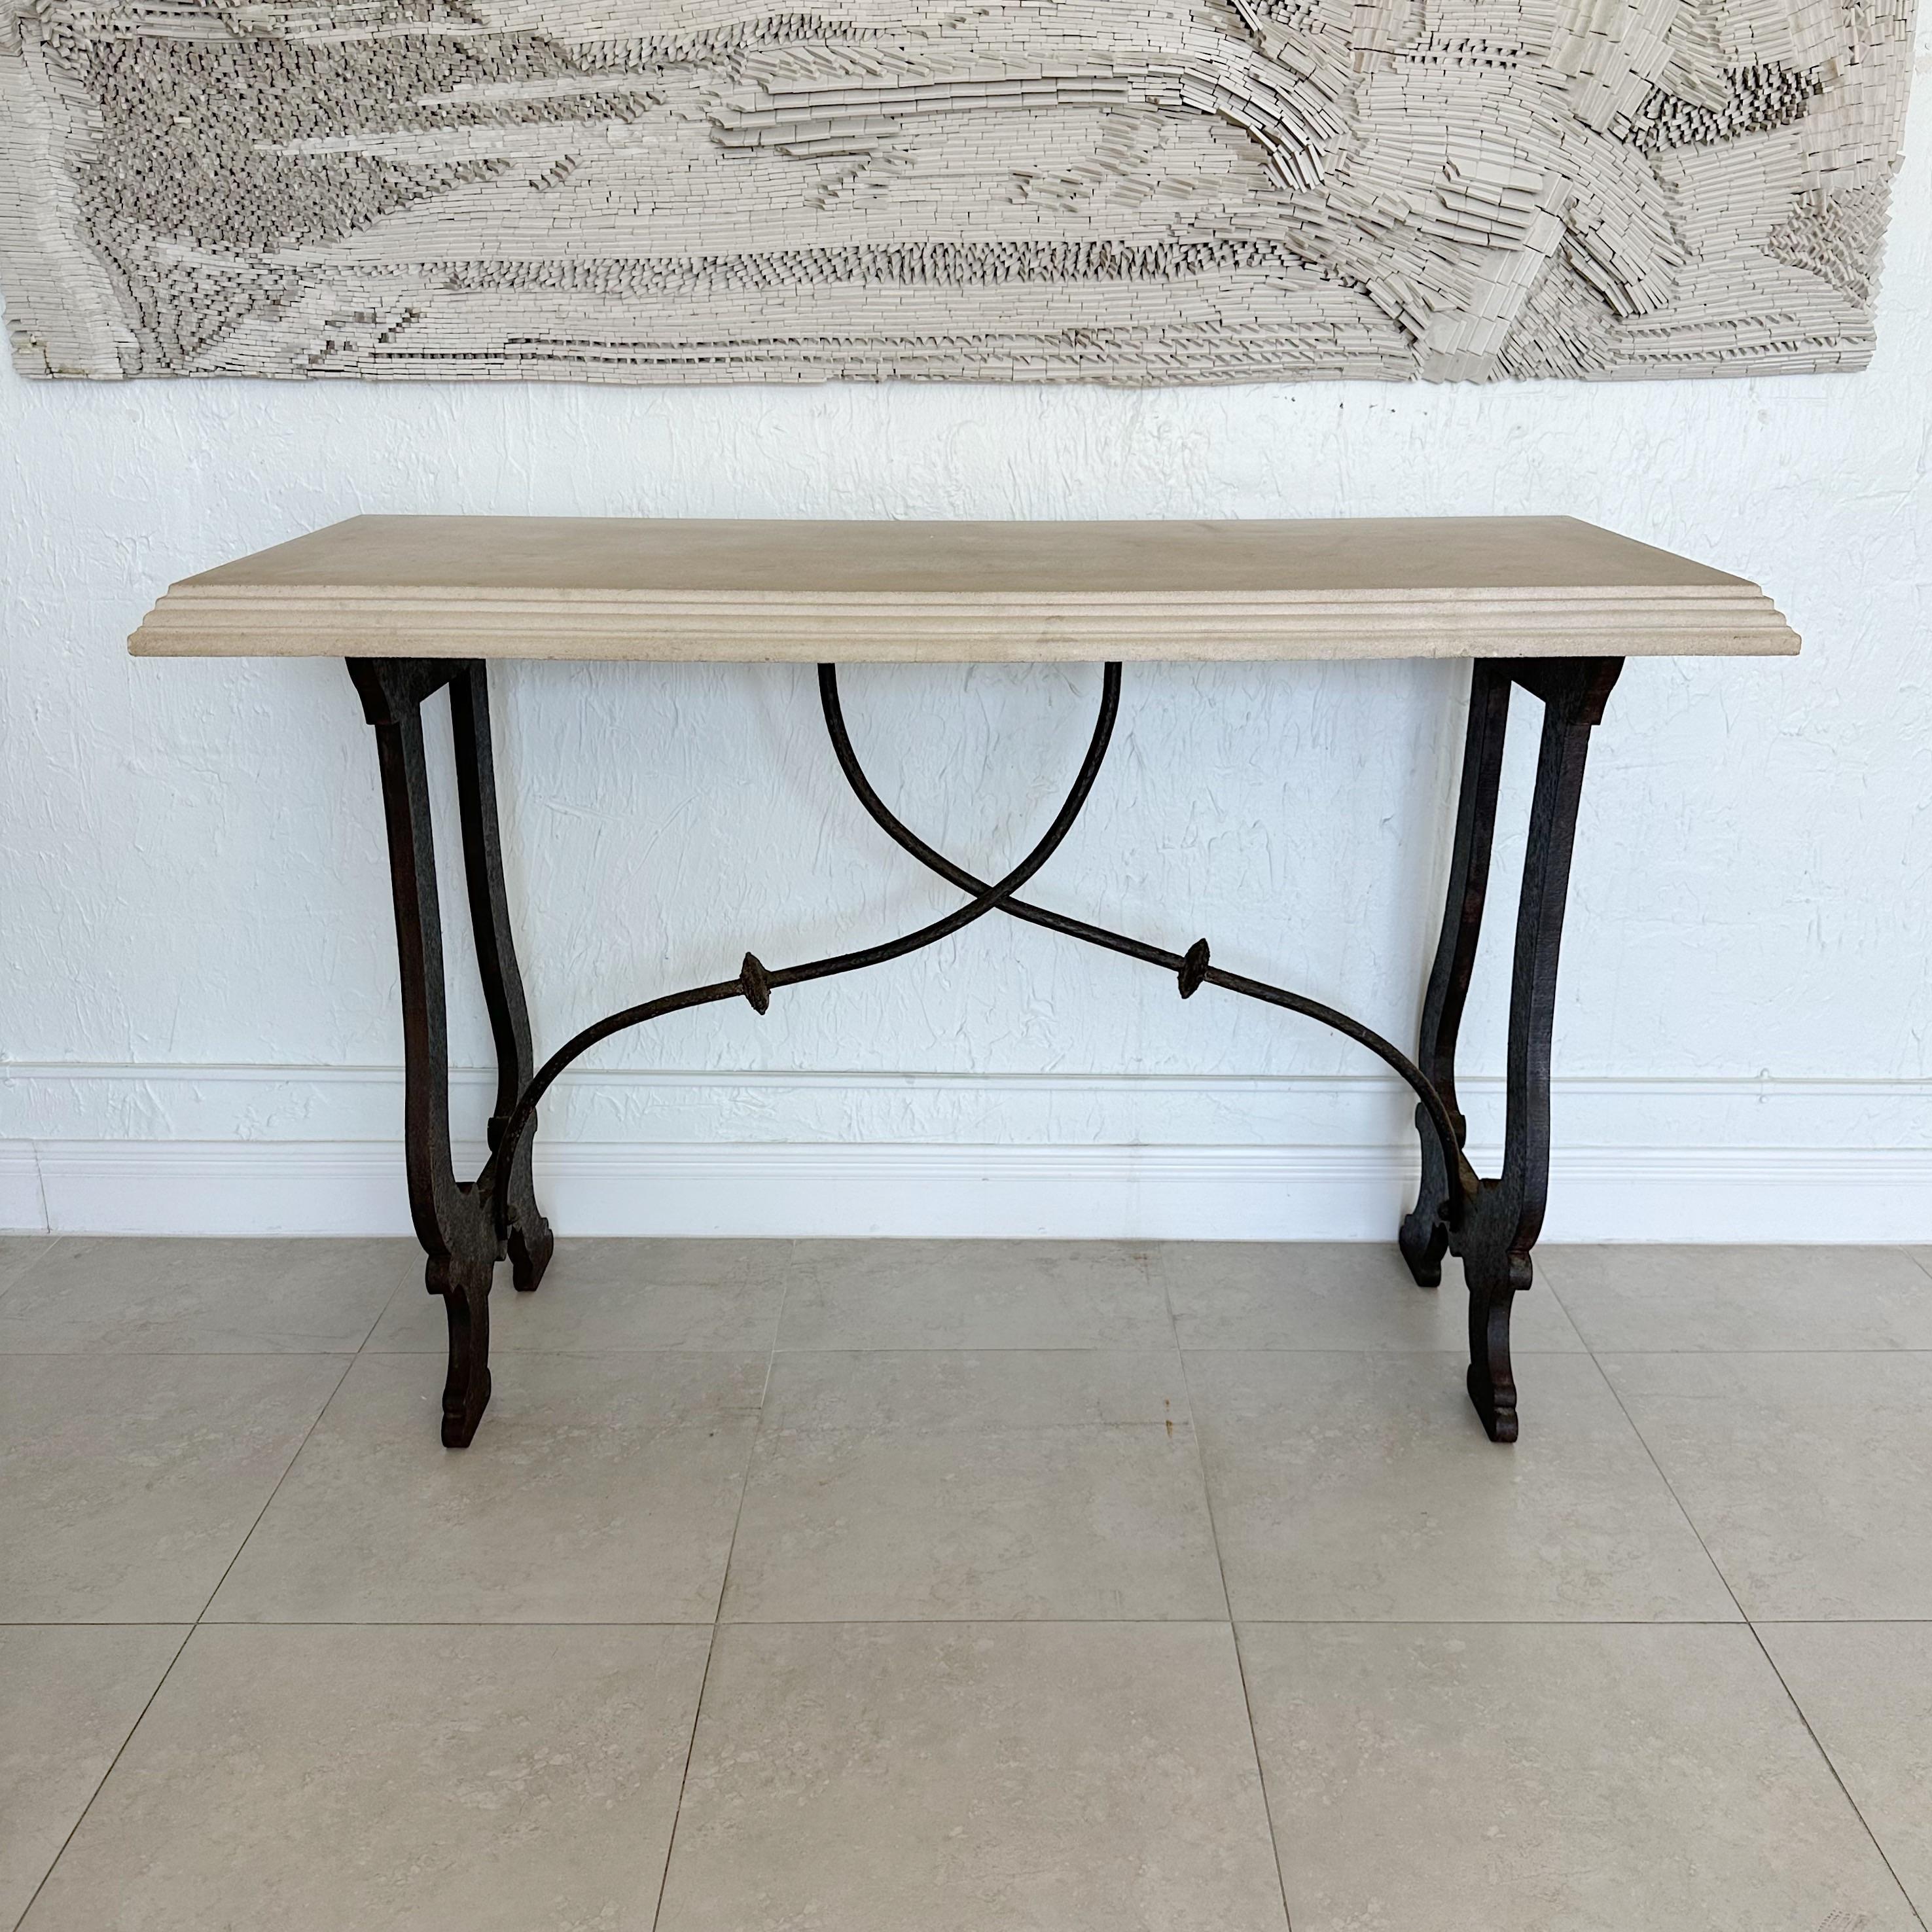 American Console Tables with Stone Tops and Iron Bases in 18th Century Style, 1980s